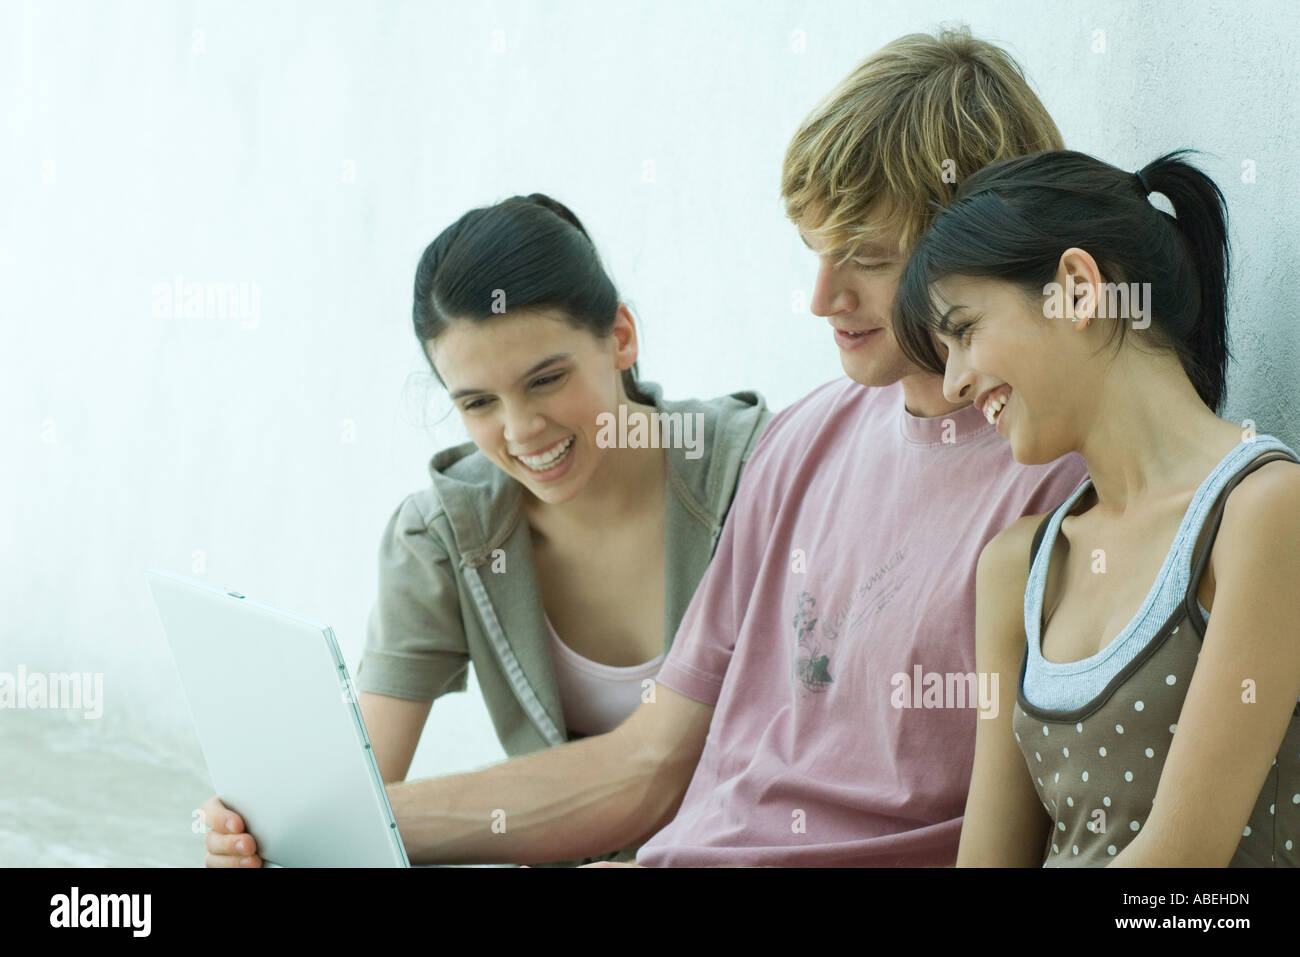 Group of young friends using laptop together Stock Photo